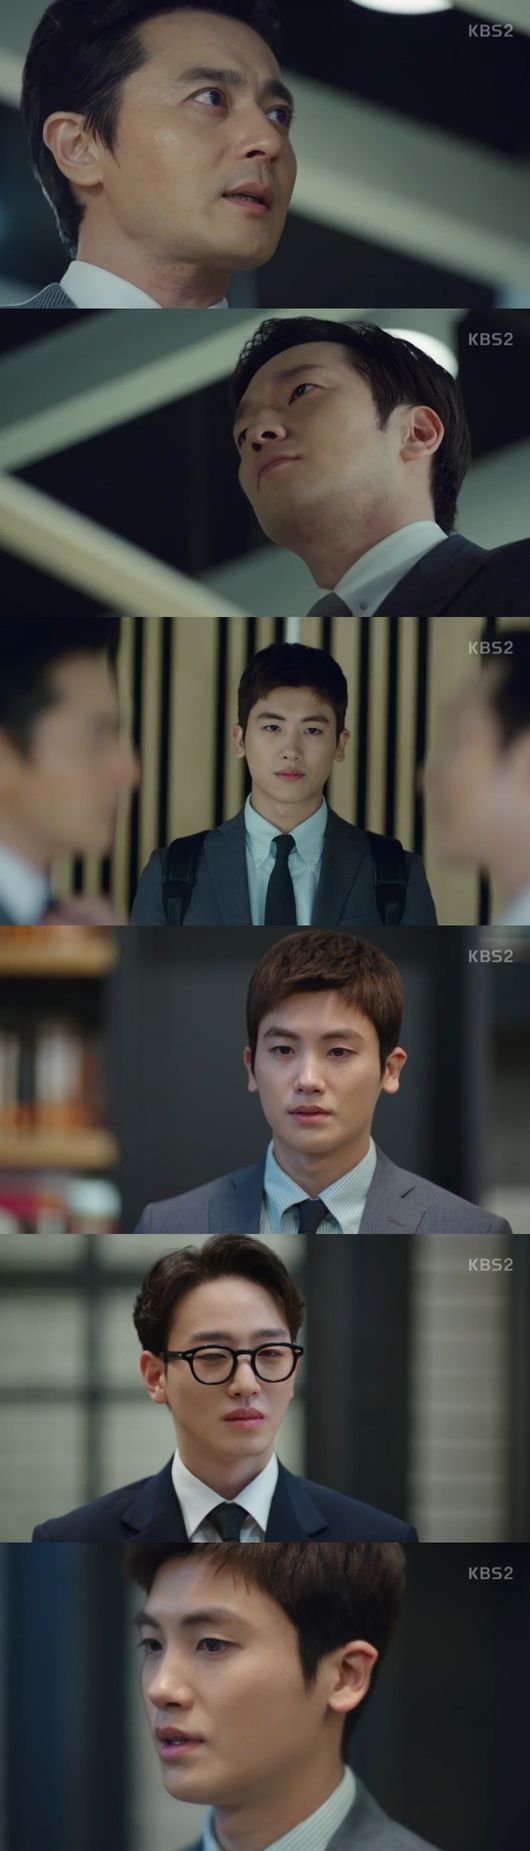 Jang Dong-gun and Park Hyung-sik were beaten by Danger.On KBS Suits, which was broadcast on the 9th, Ha Yeons ex-husband came to visit. The ex-husband was a new drug contracted by a pharmaceutical company representative, and three people were killed and caught in a lawsuit.Ha-yeon asked Kang Suk to take charge, and Kang Suk responded negatively, Is not it a case of killing three people?I know that I have lived for five years, but I do not want to kill him, said Kang Suk, who said, It is disadvantageous in the trial that my ex-wife is a representative of a law firm.Kang Suk then tells Ha Yeon that he will take it if he does not interfere, and Ha Yeon accepts it. A few days later, the other lawyer in the chemical class action case, which Ha Yeon is in charge, visits Kang Suk.He touches Kang Suks planting, saying, If you do not win by Ace, you can not be a real victory.I was going to go out at the time, but I couldnt go out because of the accident, he says, speaking of Harvard Business School Moot Court in the past.After the lawyer went, Kang Suk went to Hayeon to inform him of the fact and said, You touch the story of Harvard Business School Moot Court.I cant just stay, he said, saying he would take on both cases.Kang Suk intended to complete the chemical case with an agreement, and goes to his opponents lawyer David.He gives out the document the reward we can give you, and there it says suck, which makes Kang Suk piss off.A few days later Kang Suk goes to see the Victims, but David is already here, he told Kang Suk to listen to the Victims, We can give you ten million won.It takes a lot of time to go to trial, and when you can get the compensation, the plaintiffs are attracted to that and Kang Suk knows that David has been hit.Kang Suk says its a step late, while Yeon Woo says, David thinks hes the lawyer and moves, so hes always one step ahead.So think about what Choi will do from Davids perspective, advises Kang Suk, who accepts the unexpected Yeon Woo advice.Meanwhile, Yeon Woo asks Kang Suk for a tip ahead of the mock court, and Kang Suk says, You know what I always say: settle it with an agreement before going to court.Yeon Woo persuades him to go to the opposing lawyer to agree on the trial.The opposing lawyer agrees with Yeon Woo, but backs up saying that there was a discussion of agreement but I did not agree in the mock court.Yeon Woo was embarrassed, and Ha-yeon, who attended as a stone, said, Did you write the agreement? Yeon Woo was embarrassed and said, I did not.Suits capture